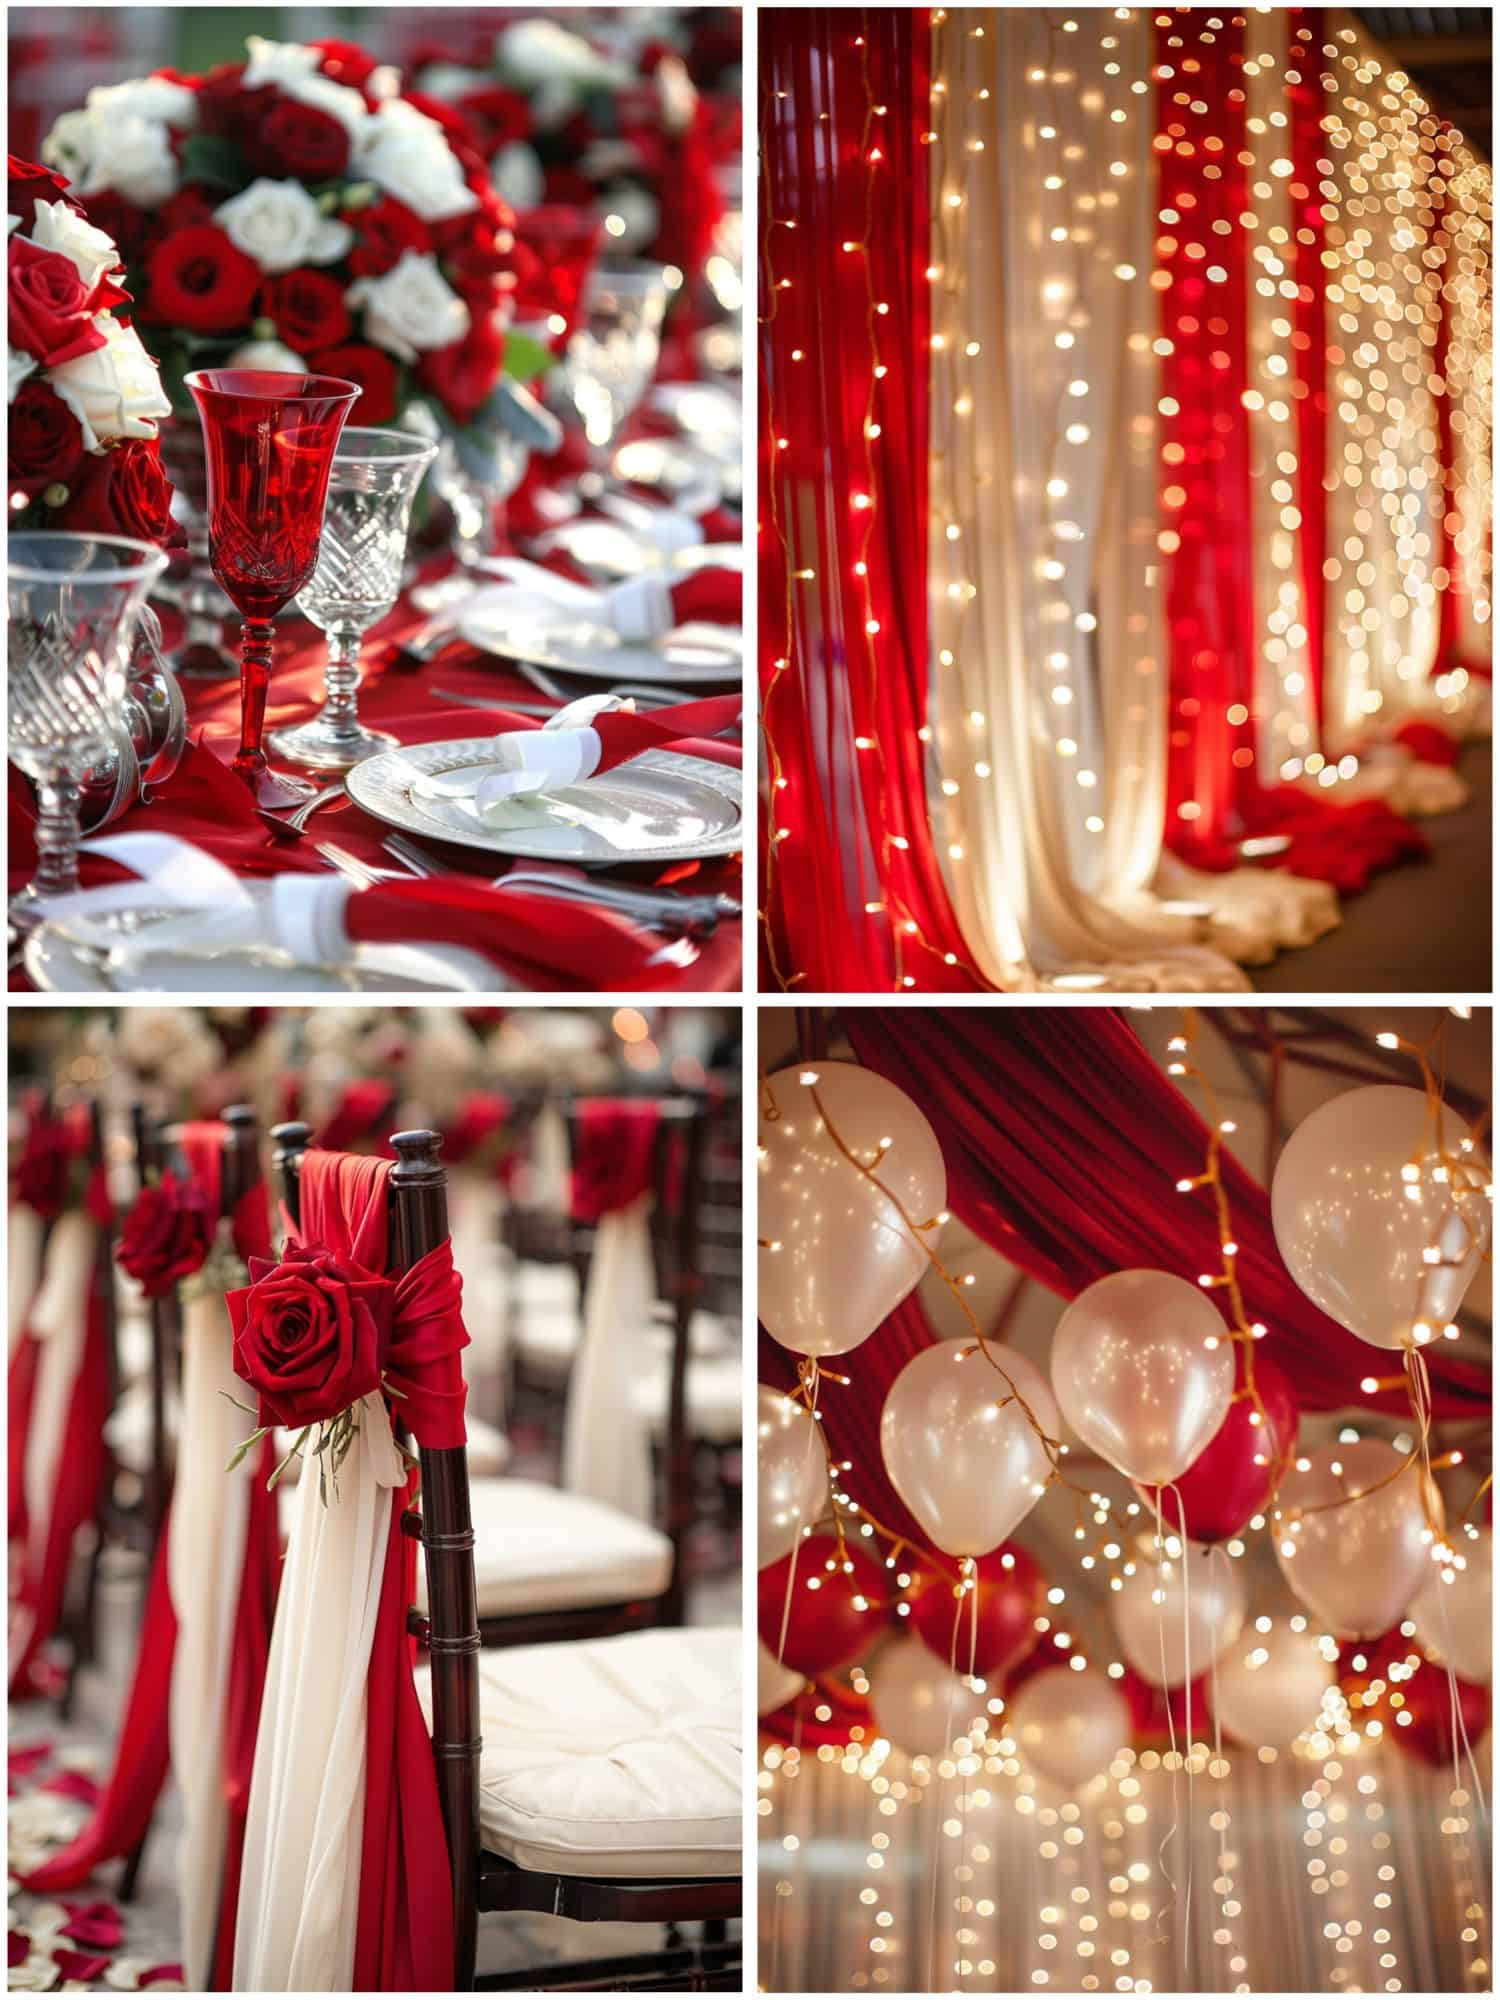 decor ideas for a red and white wedding theme